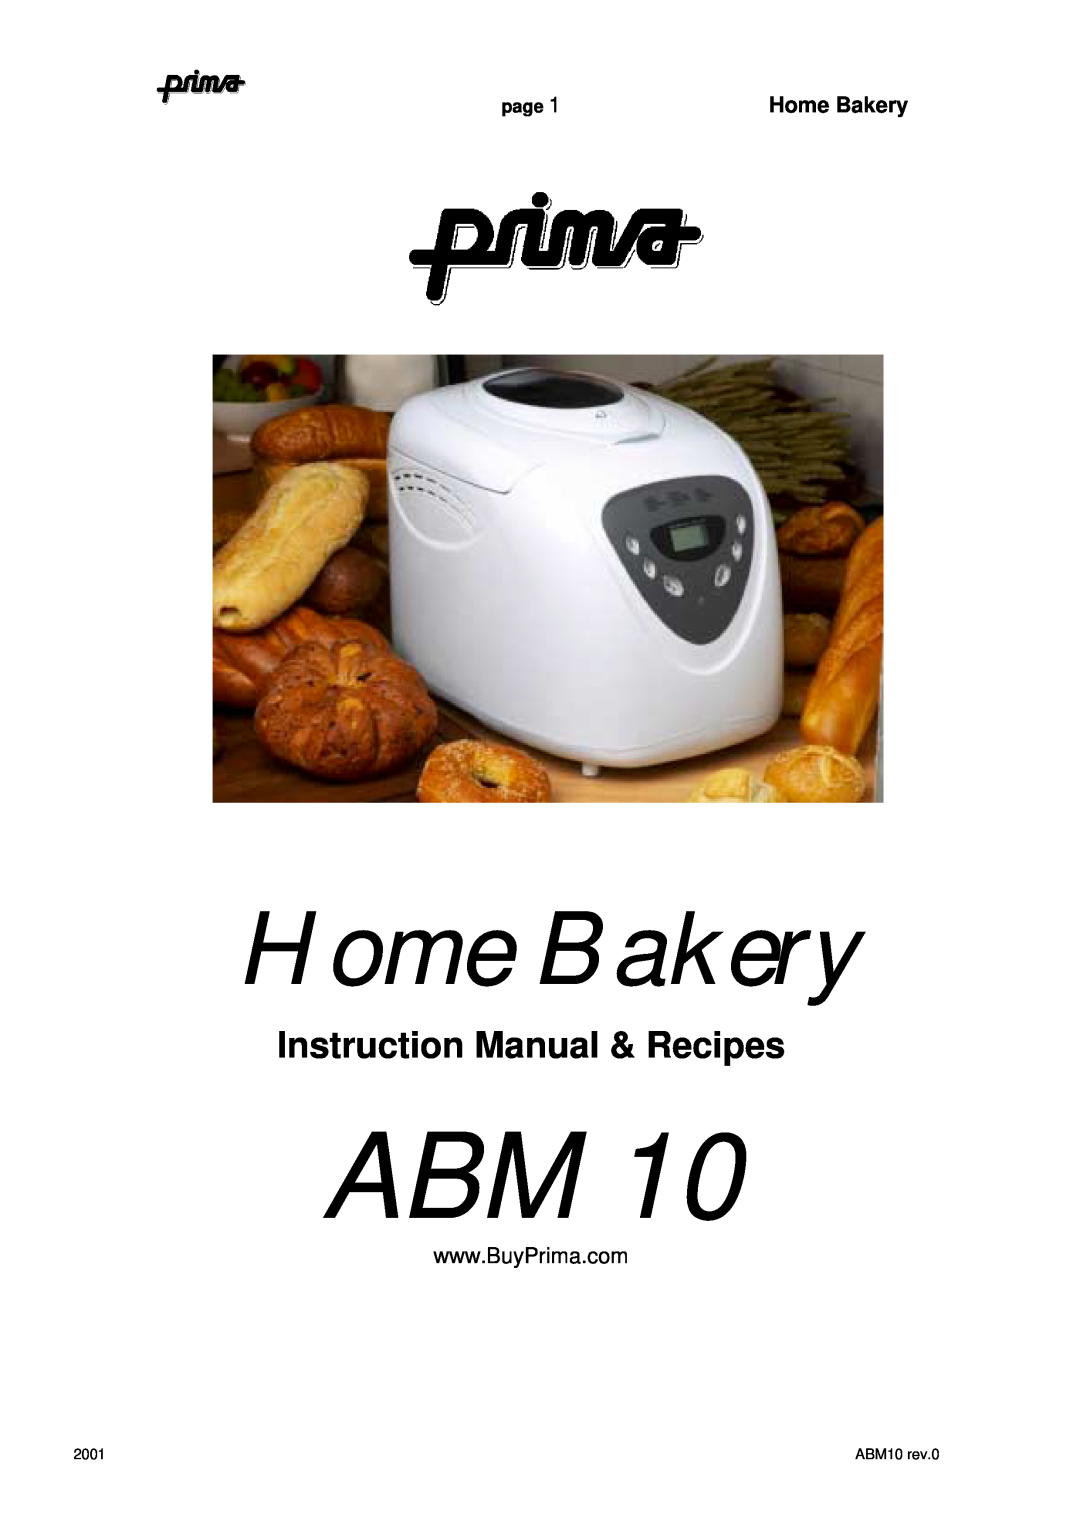 Prima instruction manual Home Bakery, page, ABM10 rev.0 